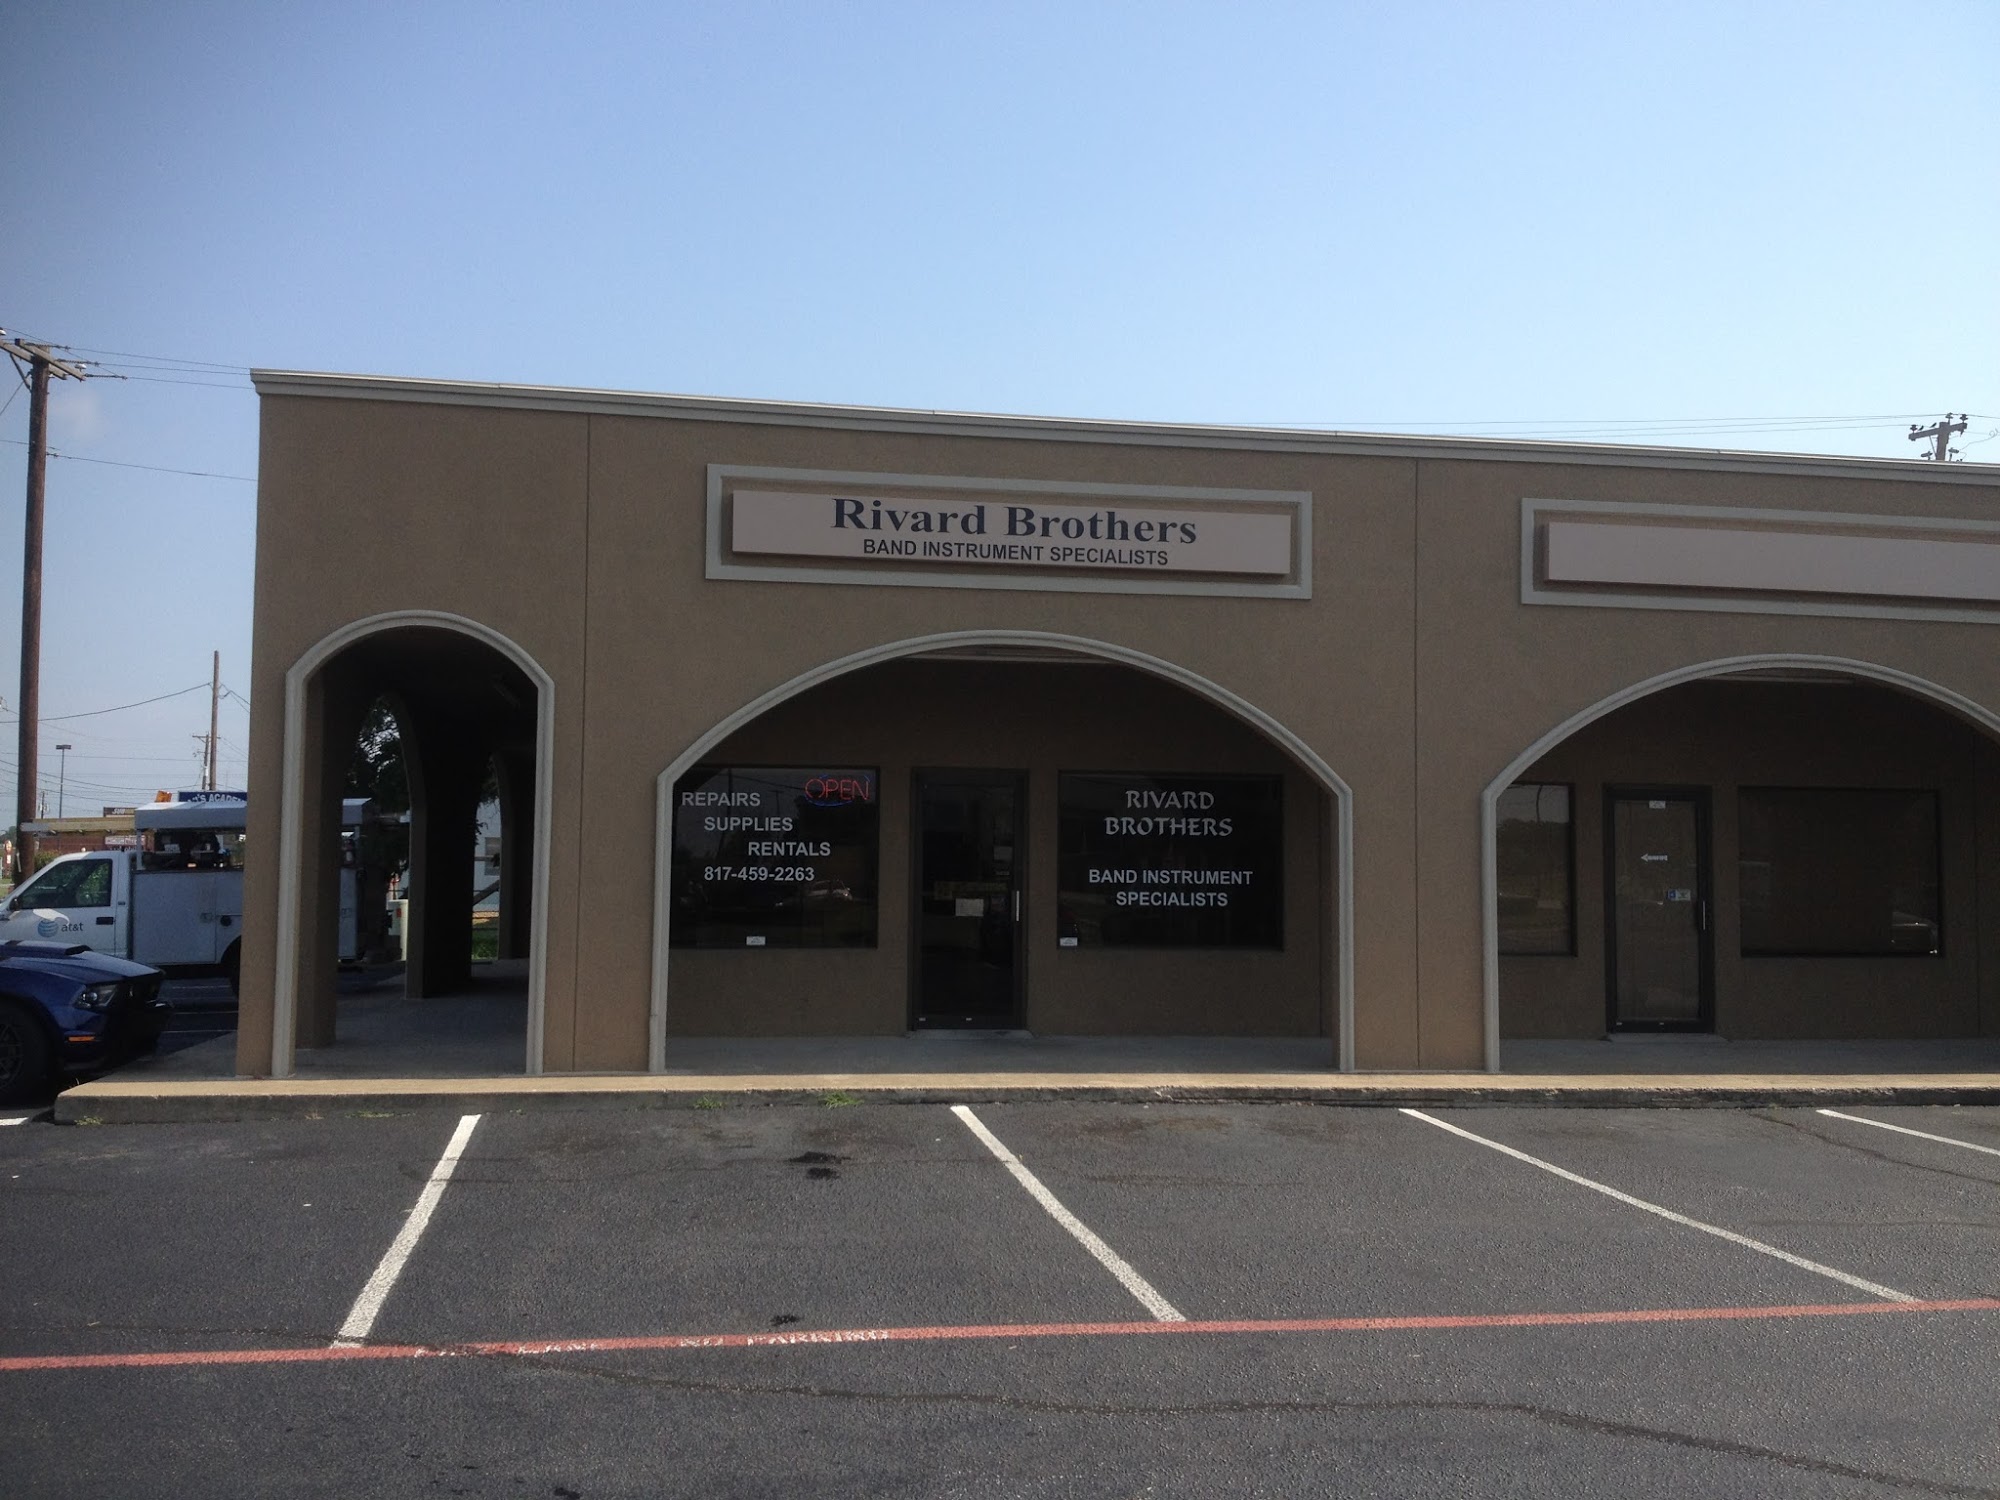 Rivard Brothers - Band Instrument Specialists